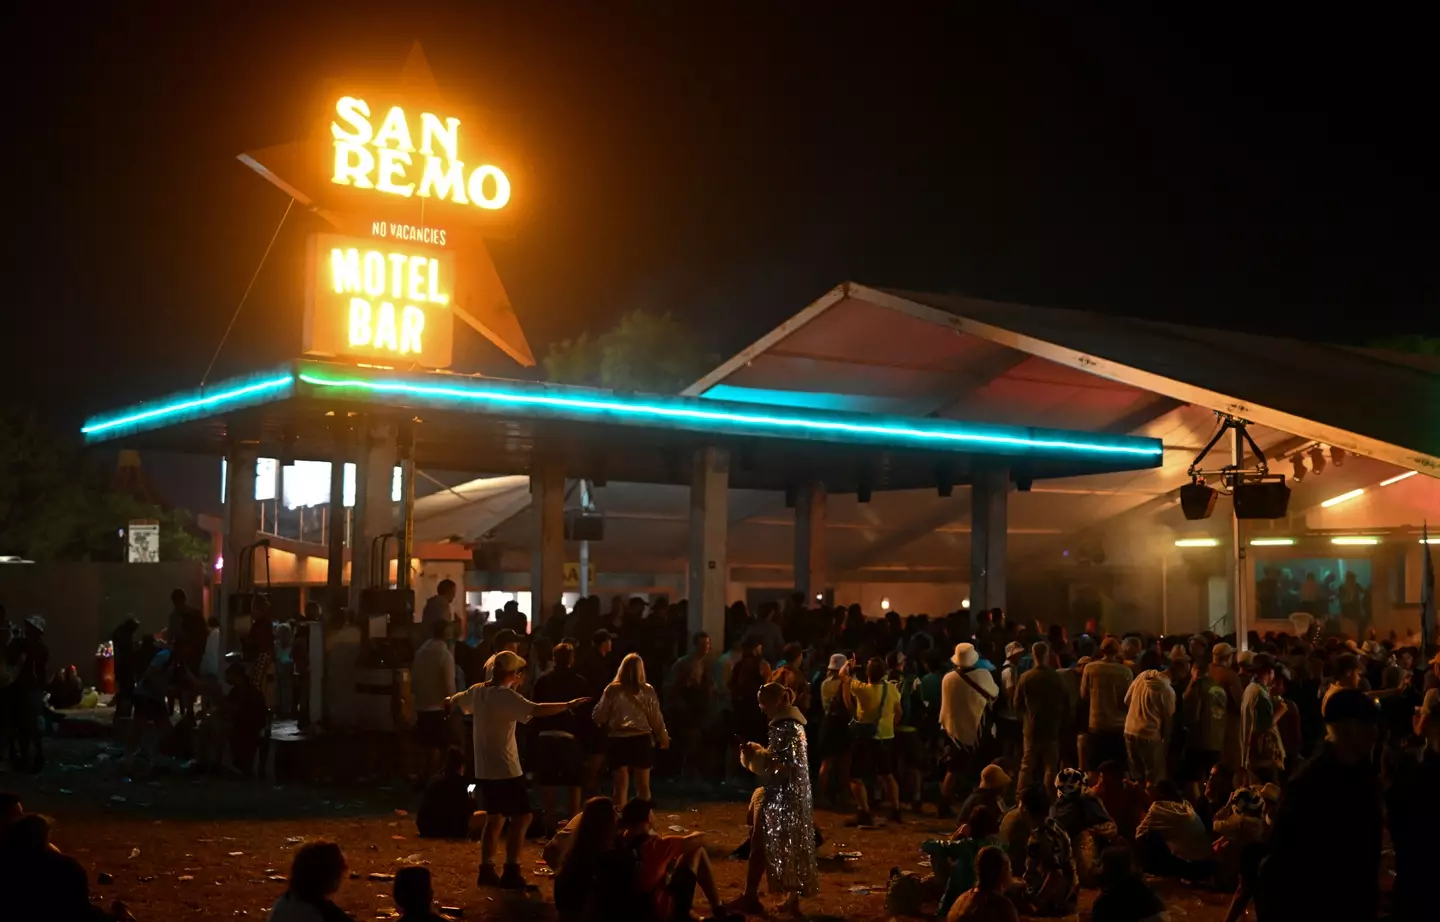 The San Remo bar is a popular watering hole at Glasto. 
(OLI SCARFF/AFP via Getty Images)